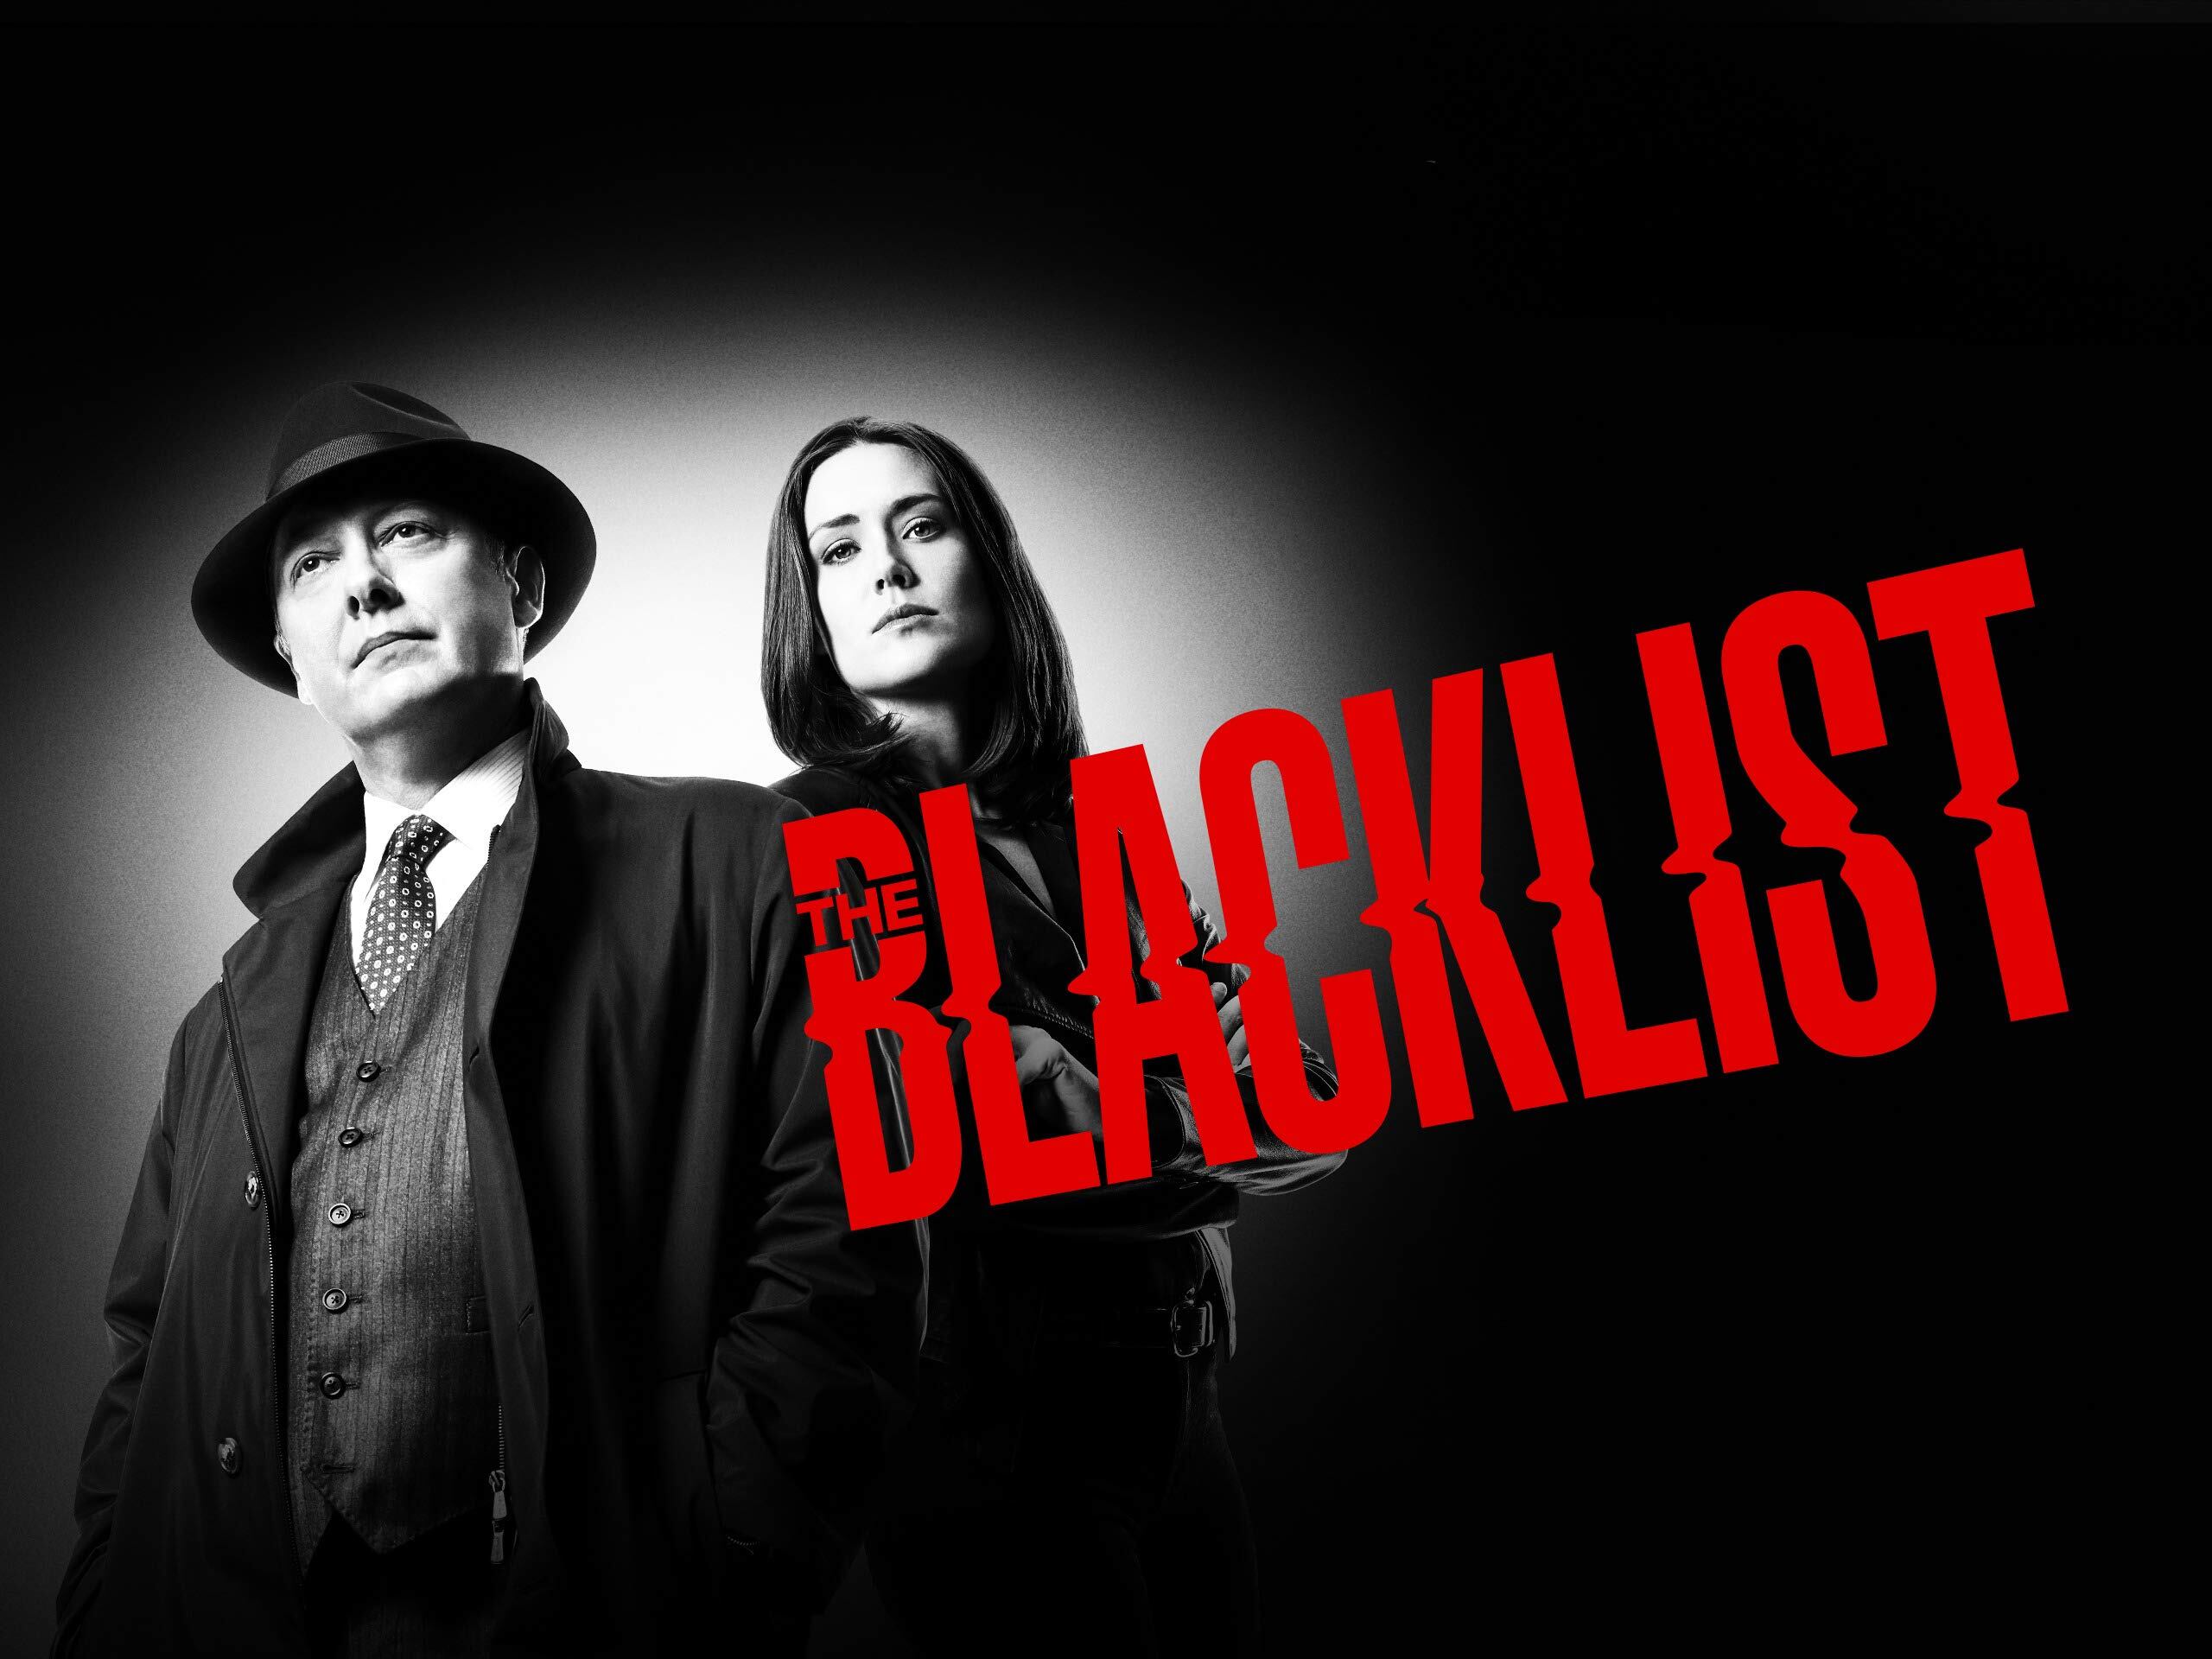 11 Extraordinary Facts About The Blacklist - Facts.net